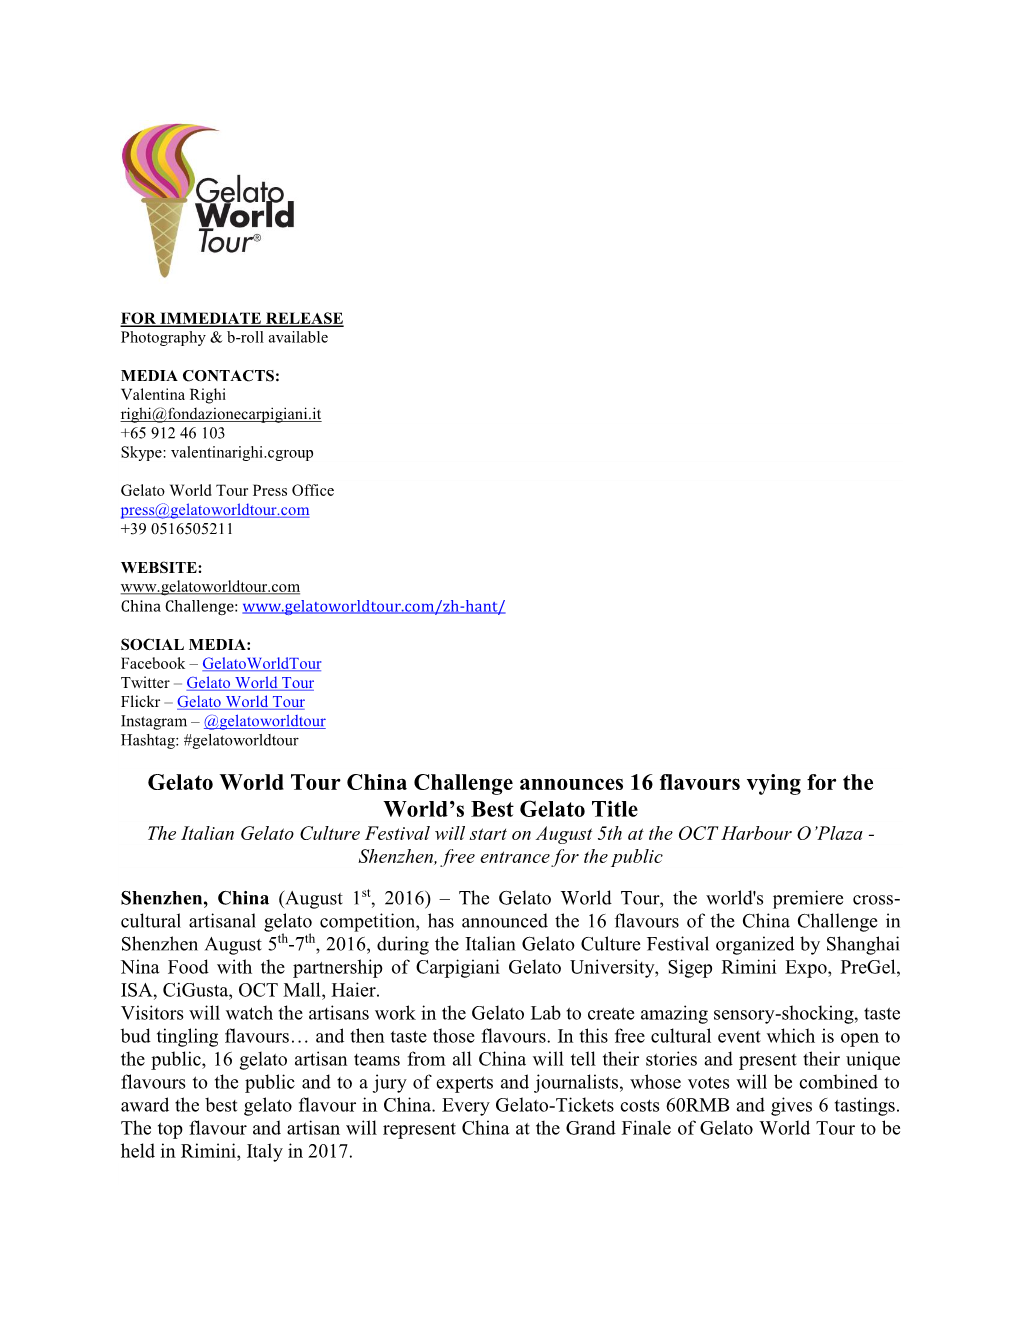 Gelato World Tour China Challenge Announces 16 Flavours Vying for The